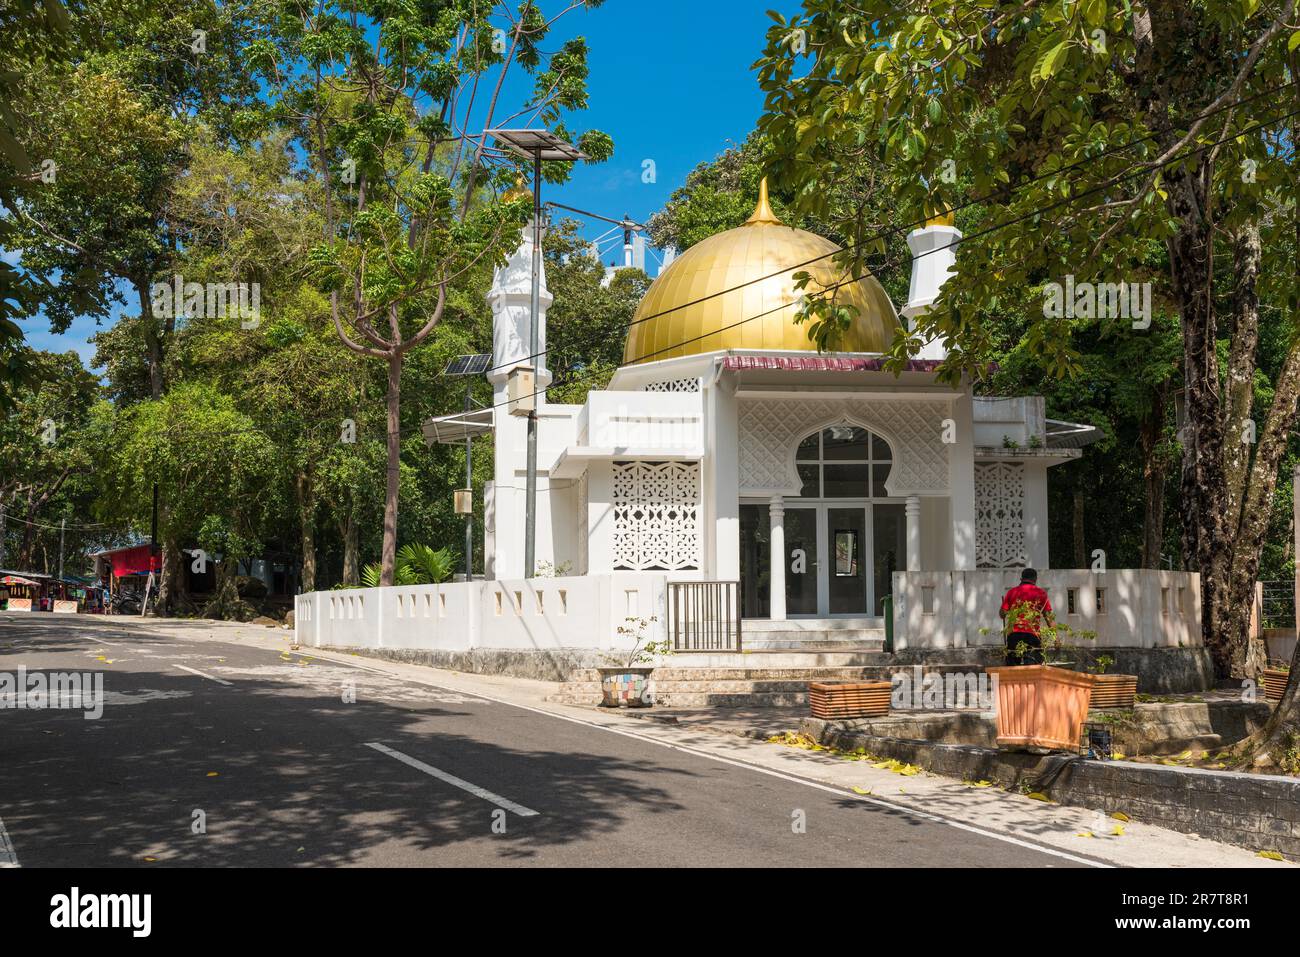 The Mosque Masjid Kilometer Nol Sabang is the northernmost Mosque of Indonesia. Situated close to the Kilometre zero on the island of Weh, northern Stock Photo